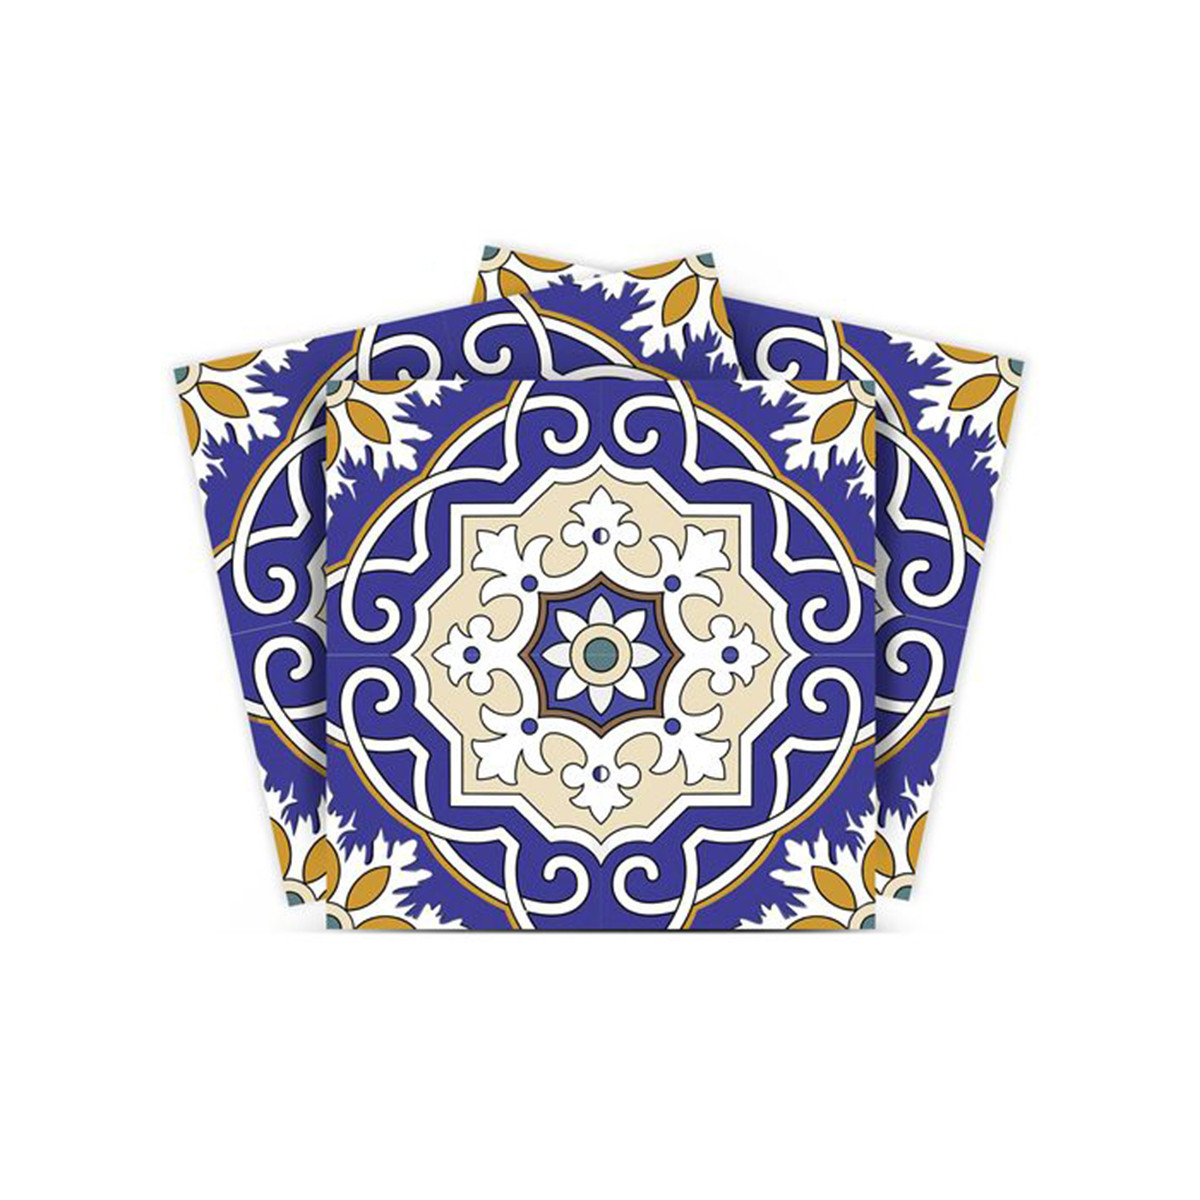 7" X 7" Blue White and Gold Mosaic Removable Tiles-399833-1